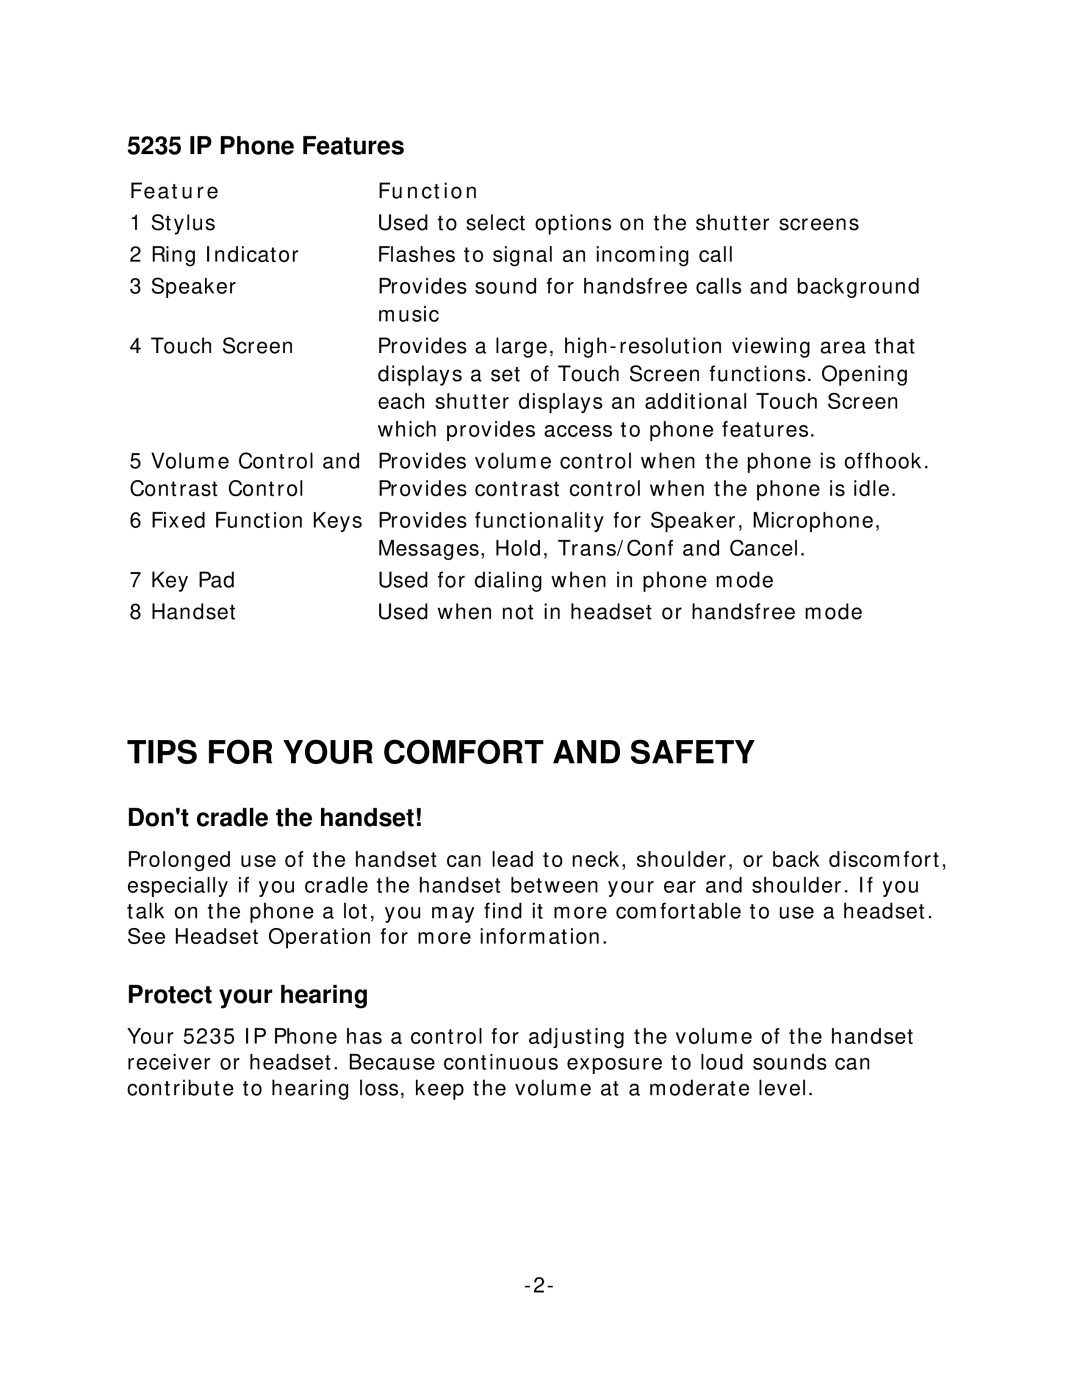 Mitel 5235 Tips For Your Comfort And Safety, IP Phone Features, Dont cradle the handset, Protect your hearing, Function 